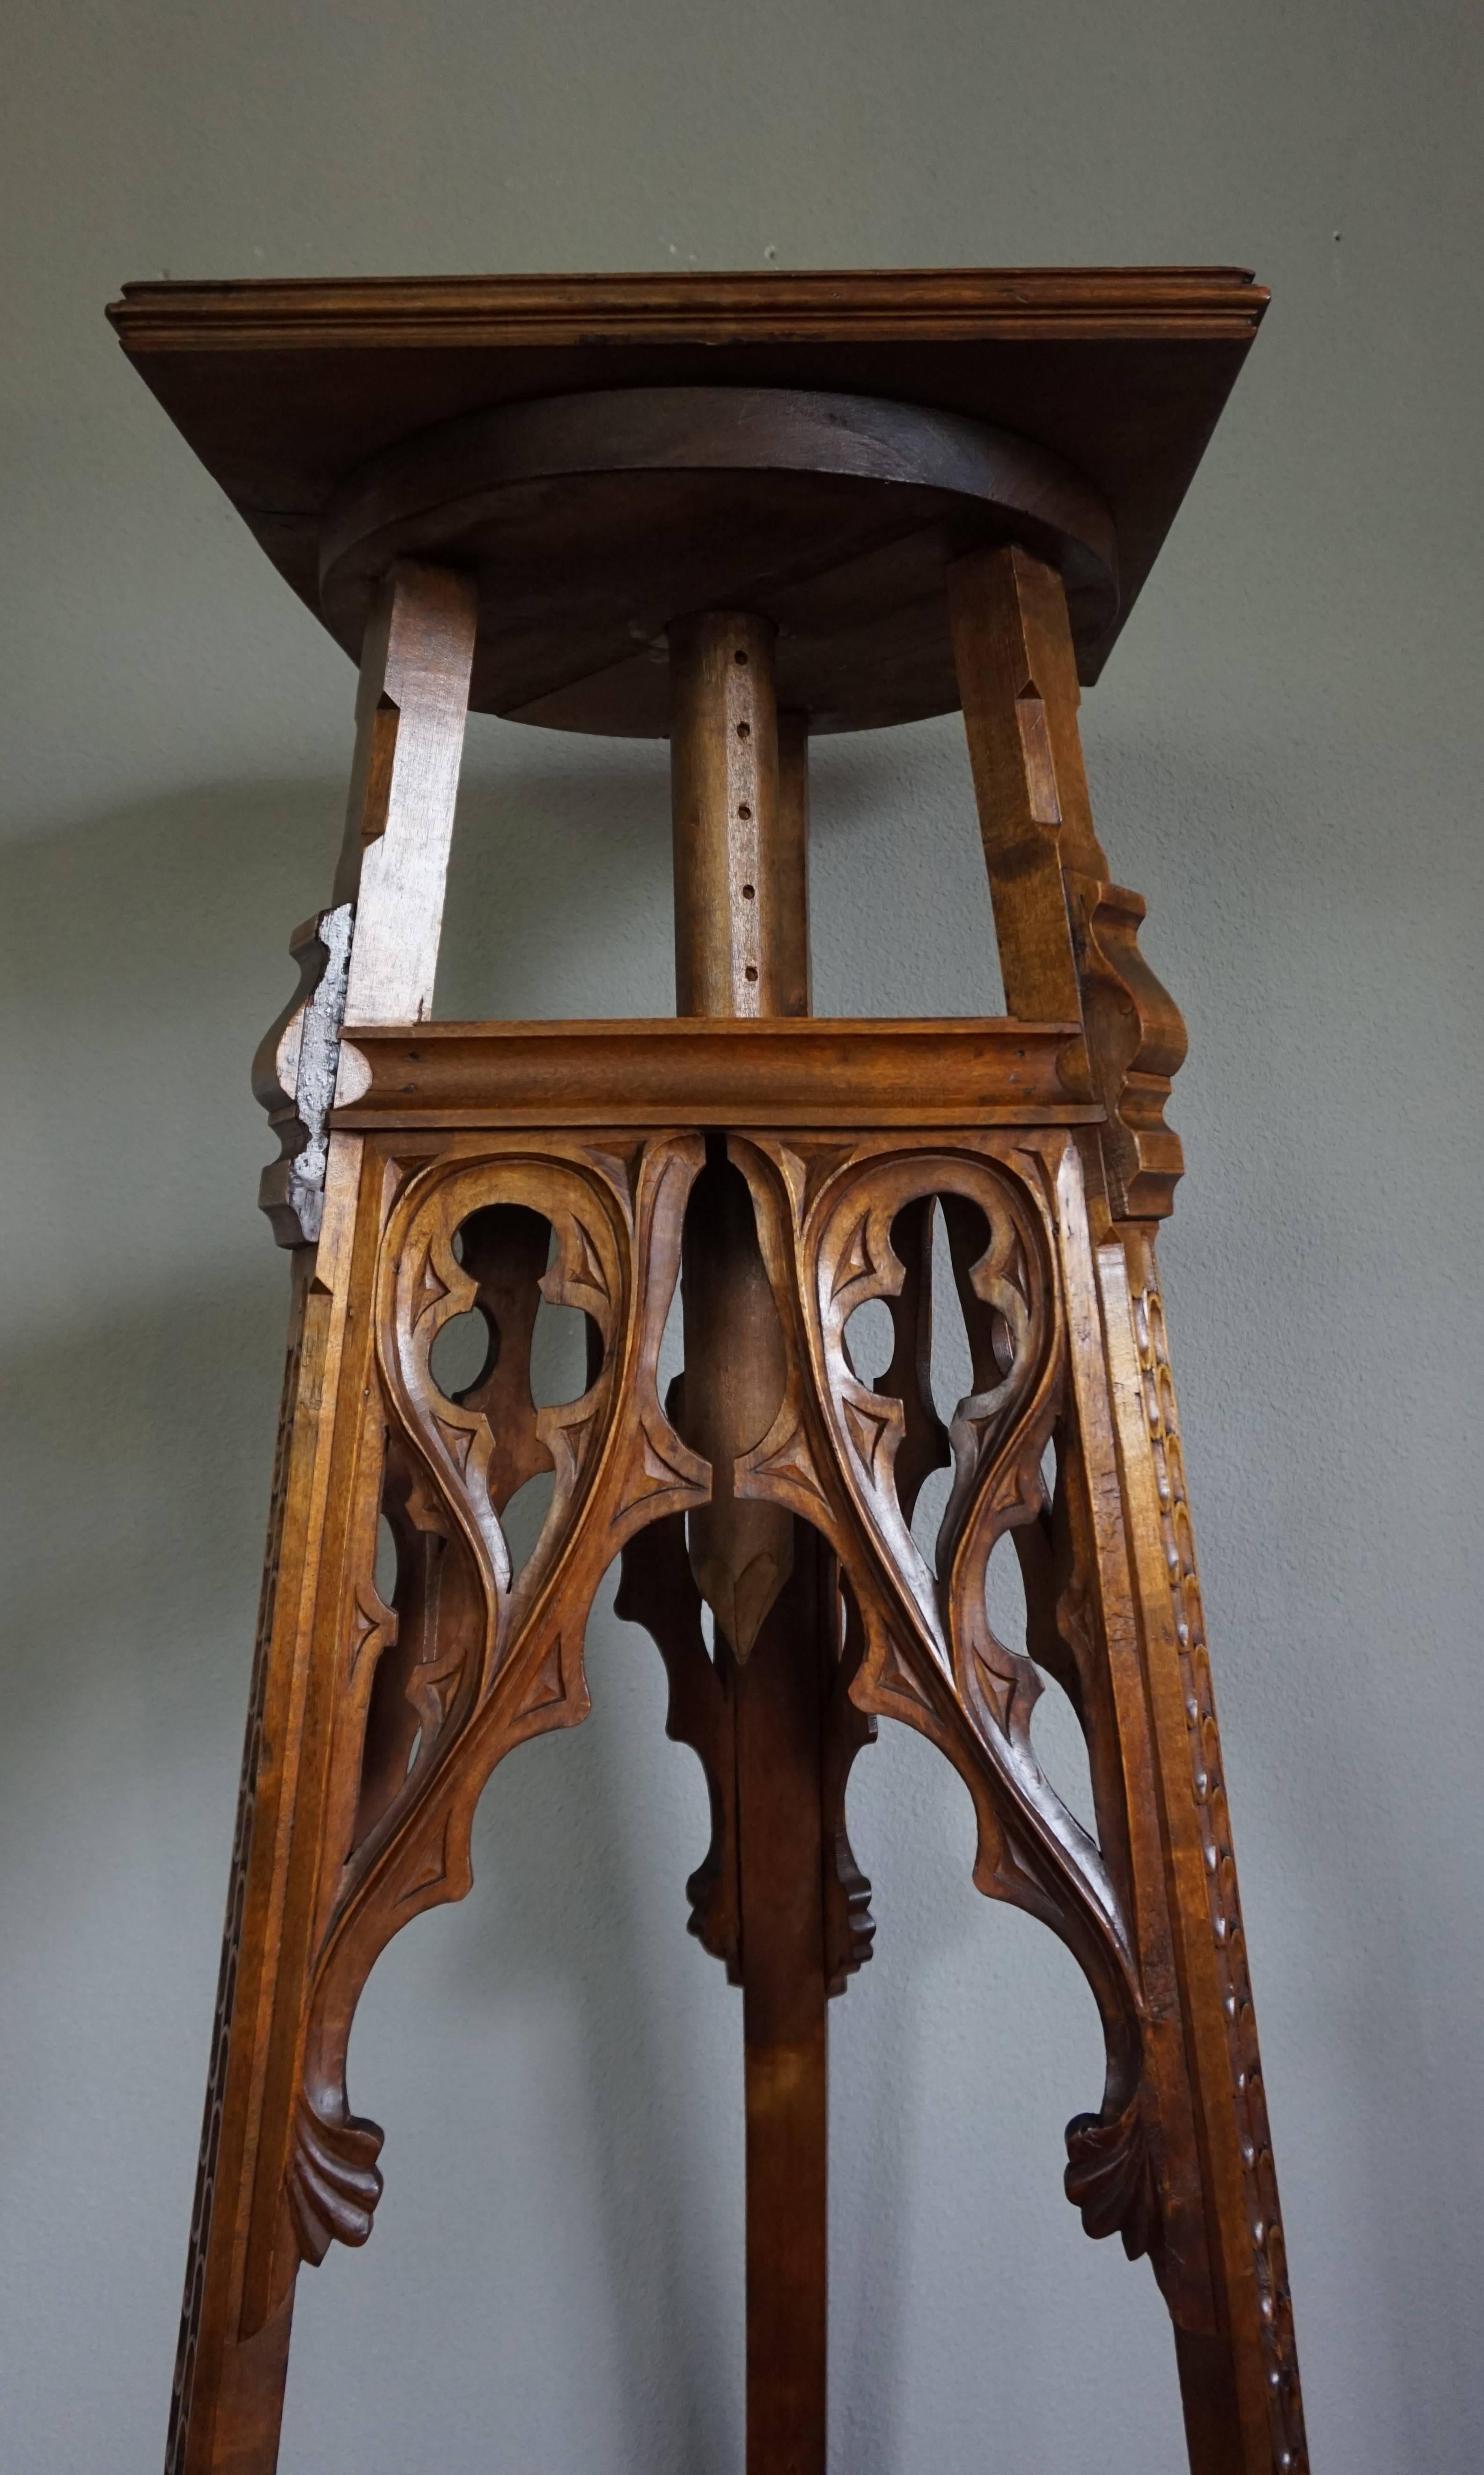 Unique Gothic Revival sculpture stand with a beautiful patina.

This impressive and adjustable Gothic stand dates from circa 1890. To find this rare and sizeable antique more than made our day. This is the largest one we ever saw and apart from the